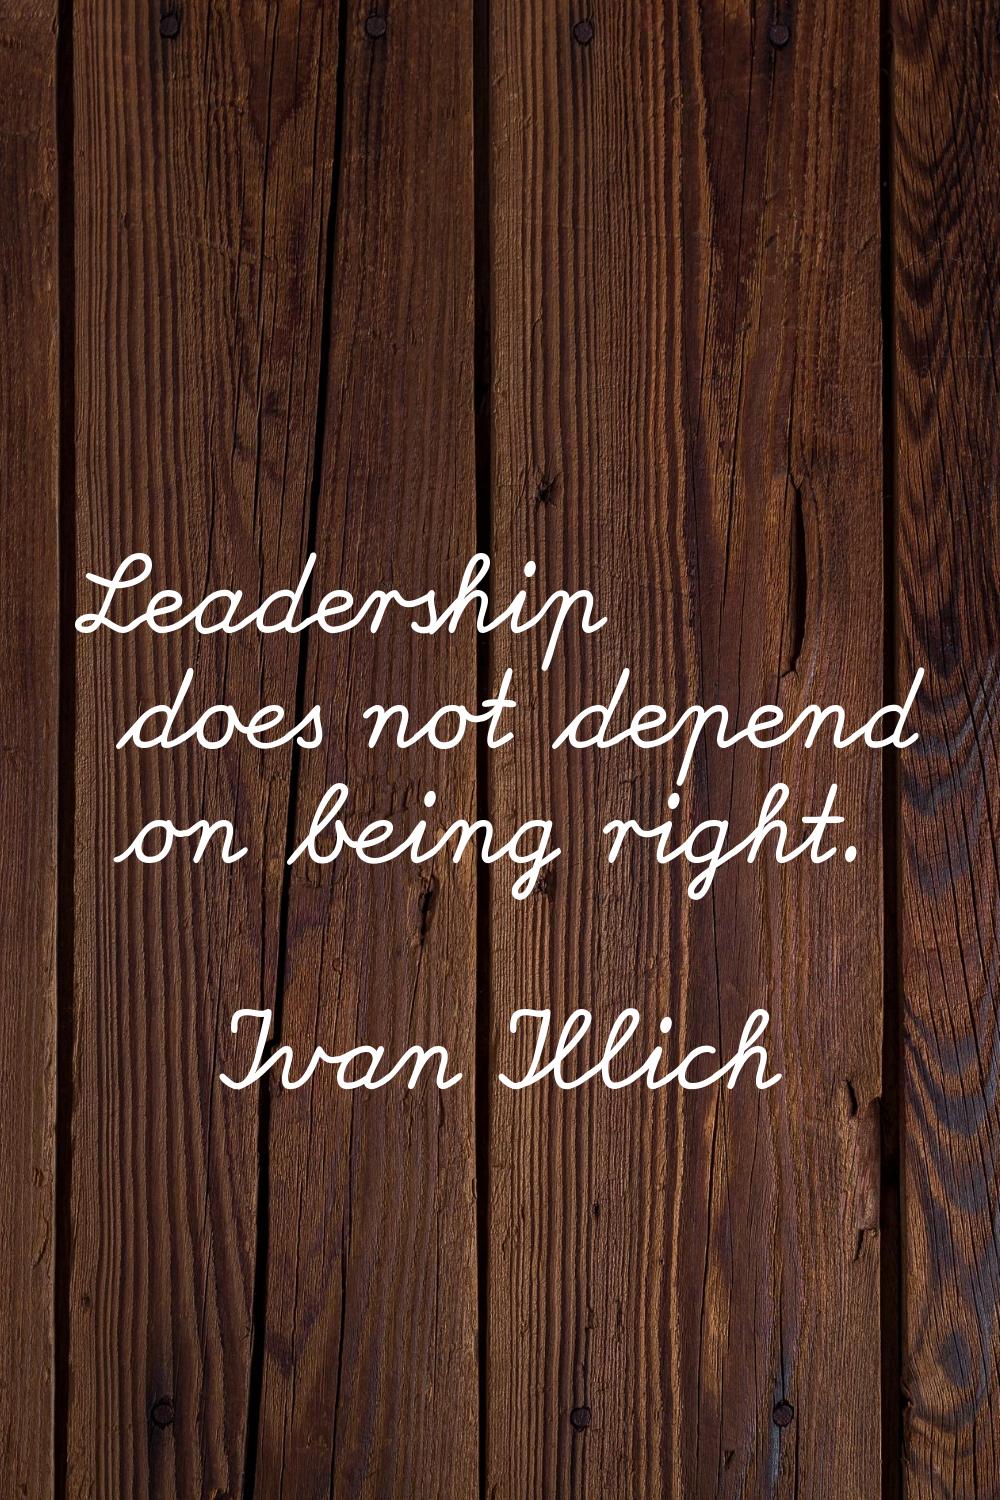 Leadership does not depend on being right.